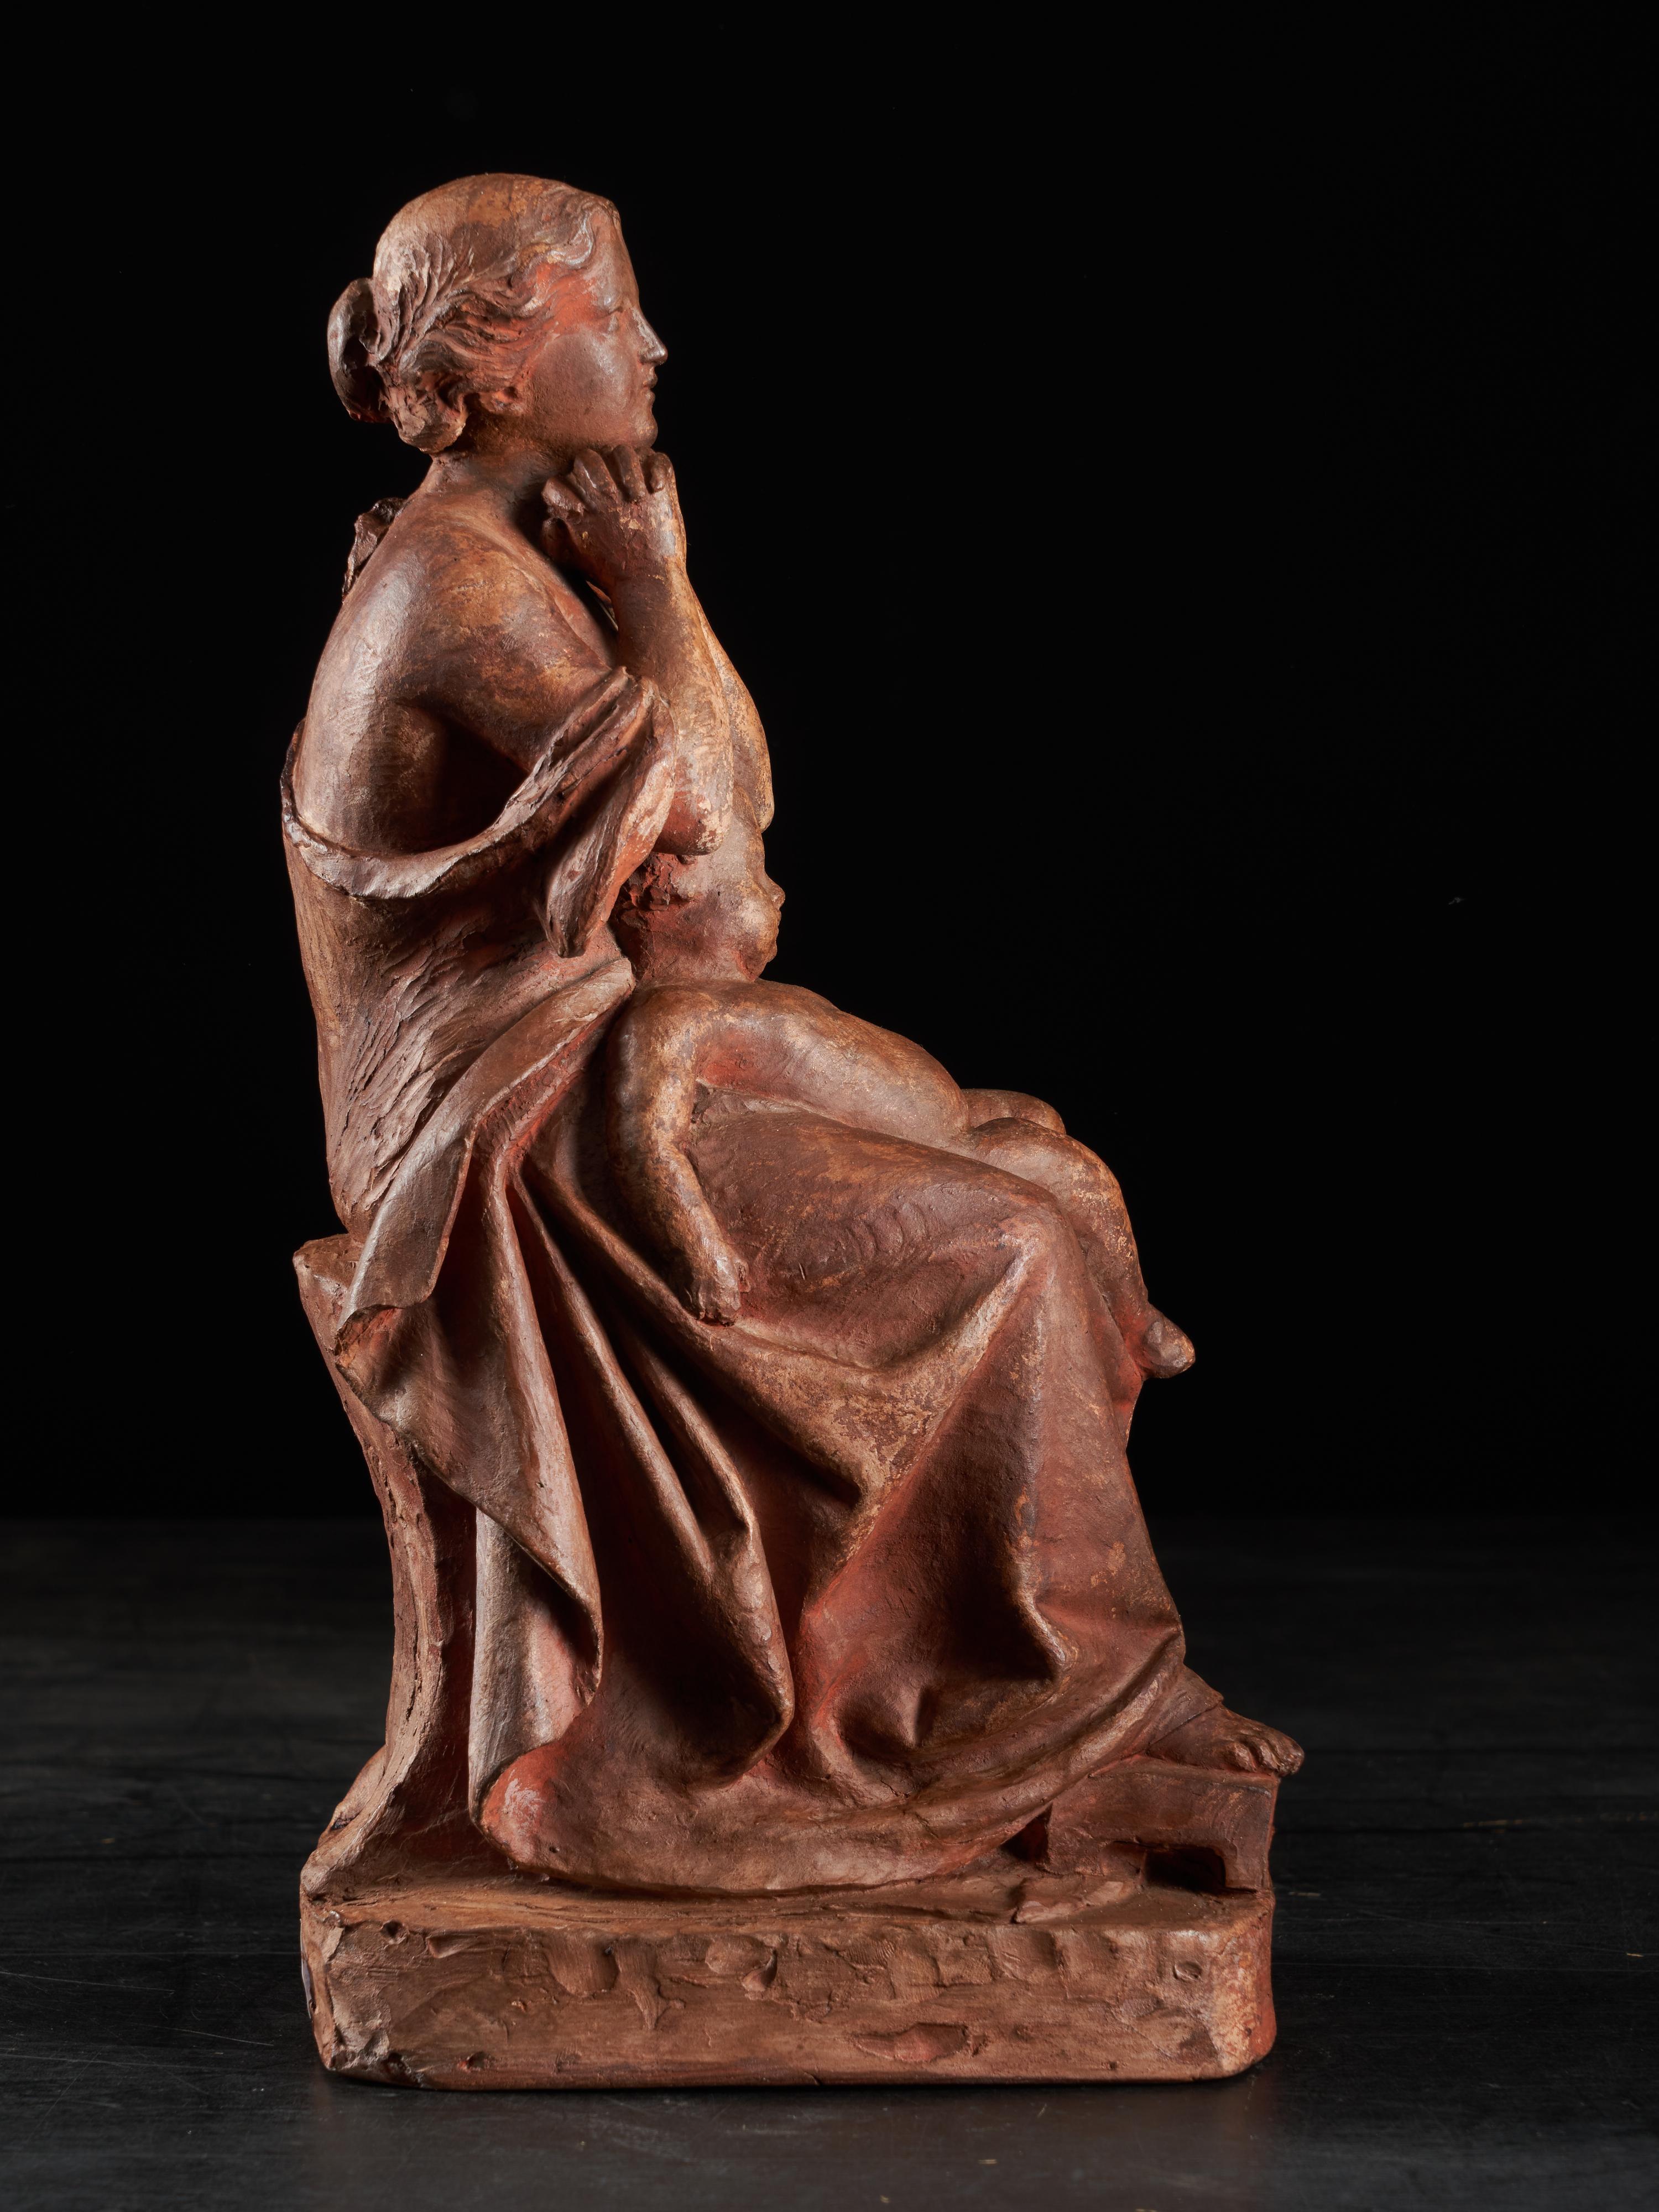 A lovely small terracotta statue of a young woman and a child. The woman is seated on a stool and has her hands clasped together. The young boy is sleeping on her lap with his limbs spread wide open. The sculpture shows the pleads and hair creases